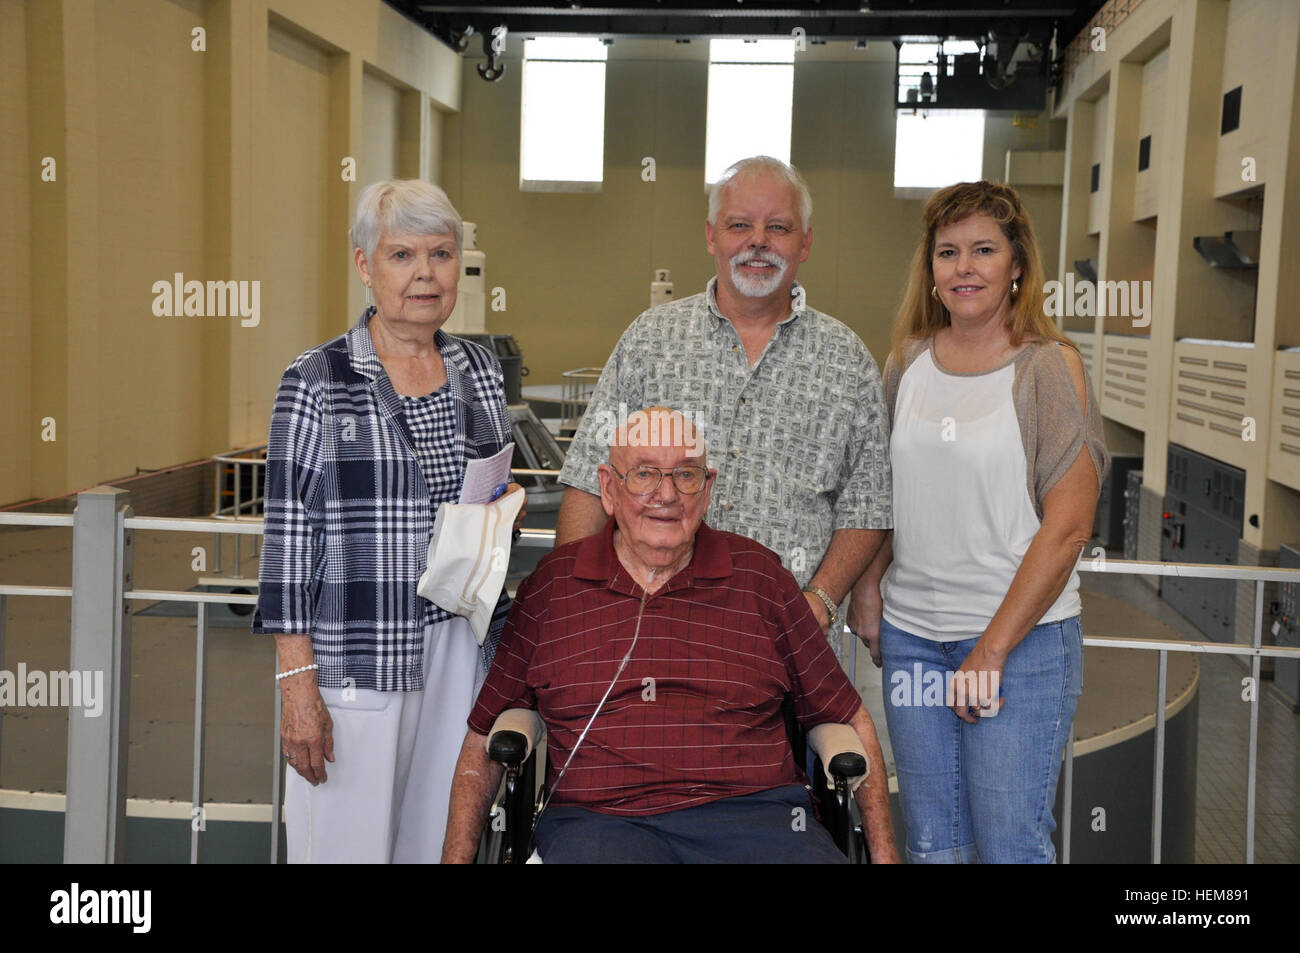 Tom Nixon, 83, who worked on the construction of the U.S. Army Corps of Engineers Nashville District Center Hill Dam that was completed for flood control in 1948, shared memories with employees and other visitors July 21, 2012. From left in background are Nixon's wife, Dot; son, David; and daughter-in-law, Gloria. Many younger folks don't remember the flooding that occurred almost annually before the dam was built, according to Nixon. Center Hill Lake open house, power plant tours draw young, elderly visitors 120721-A-HL948-002 Stock Photo